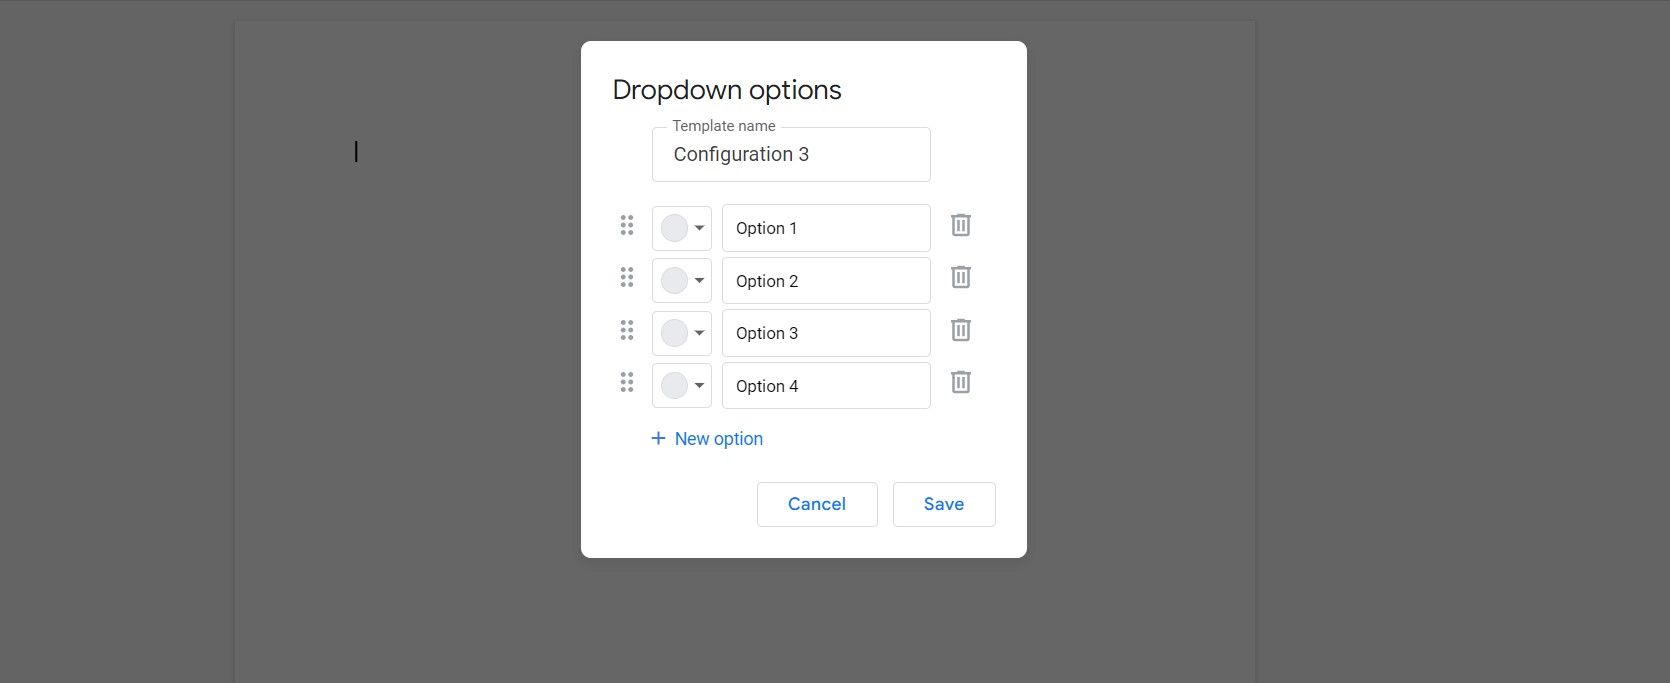 how-to-create-a-dropdown-list-in-google-docs